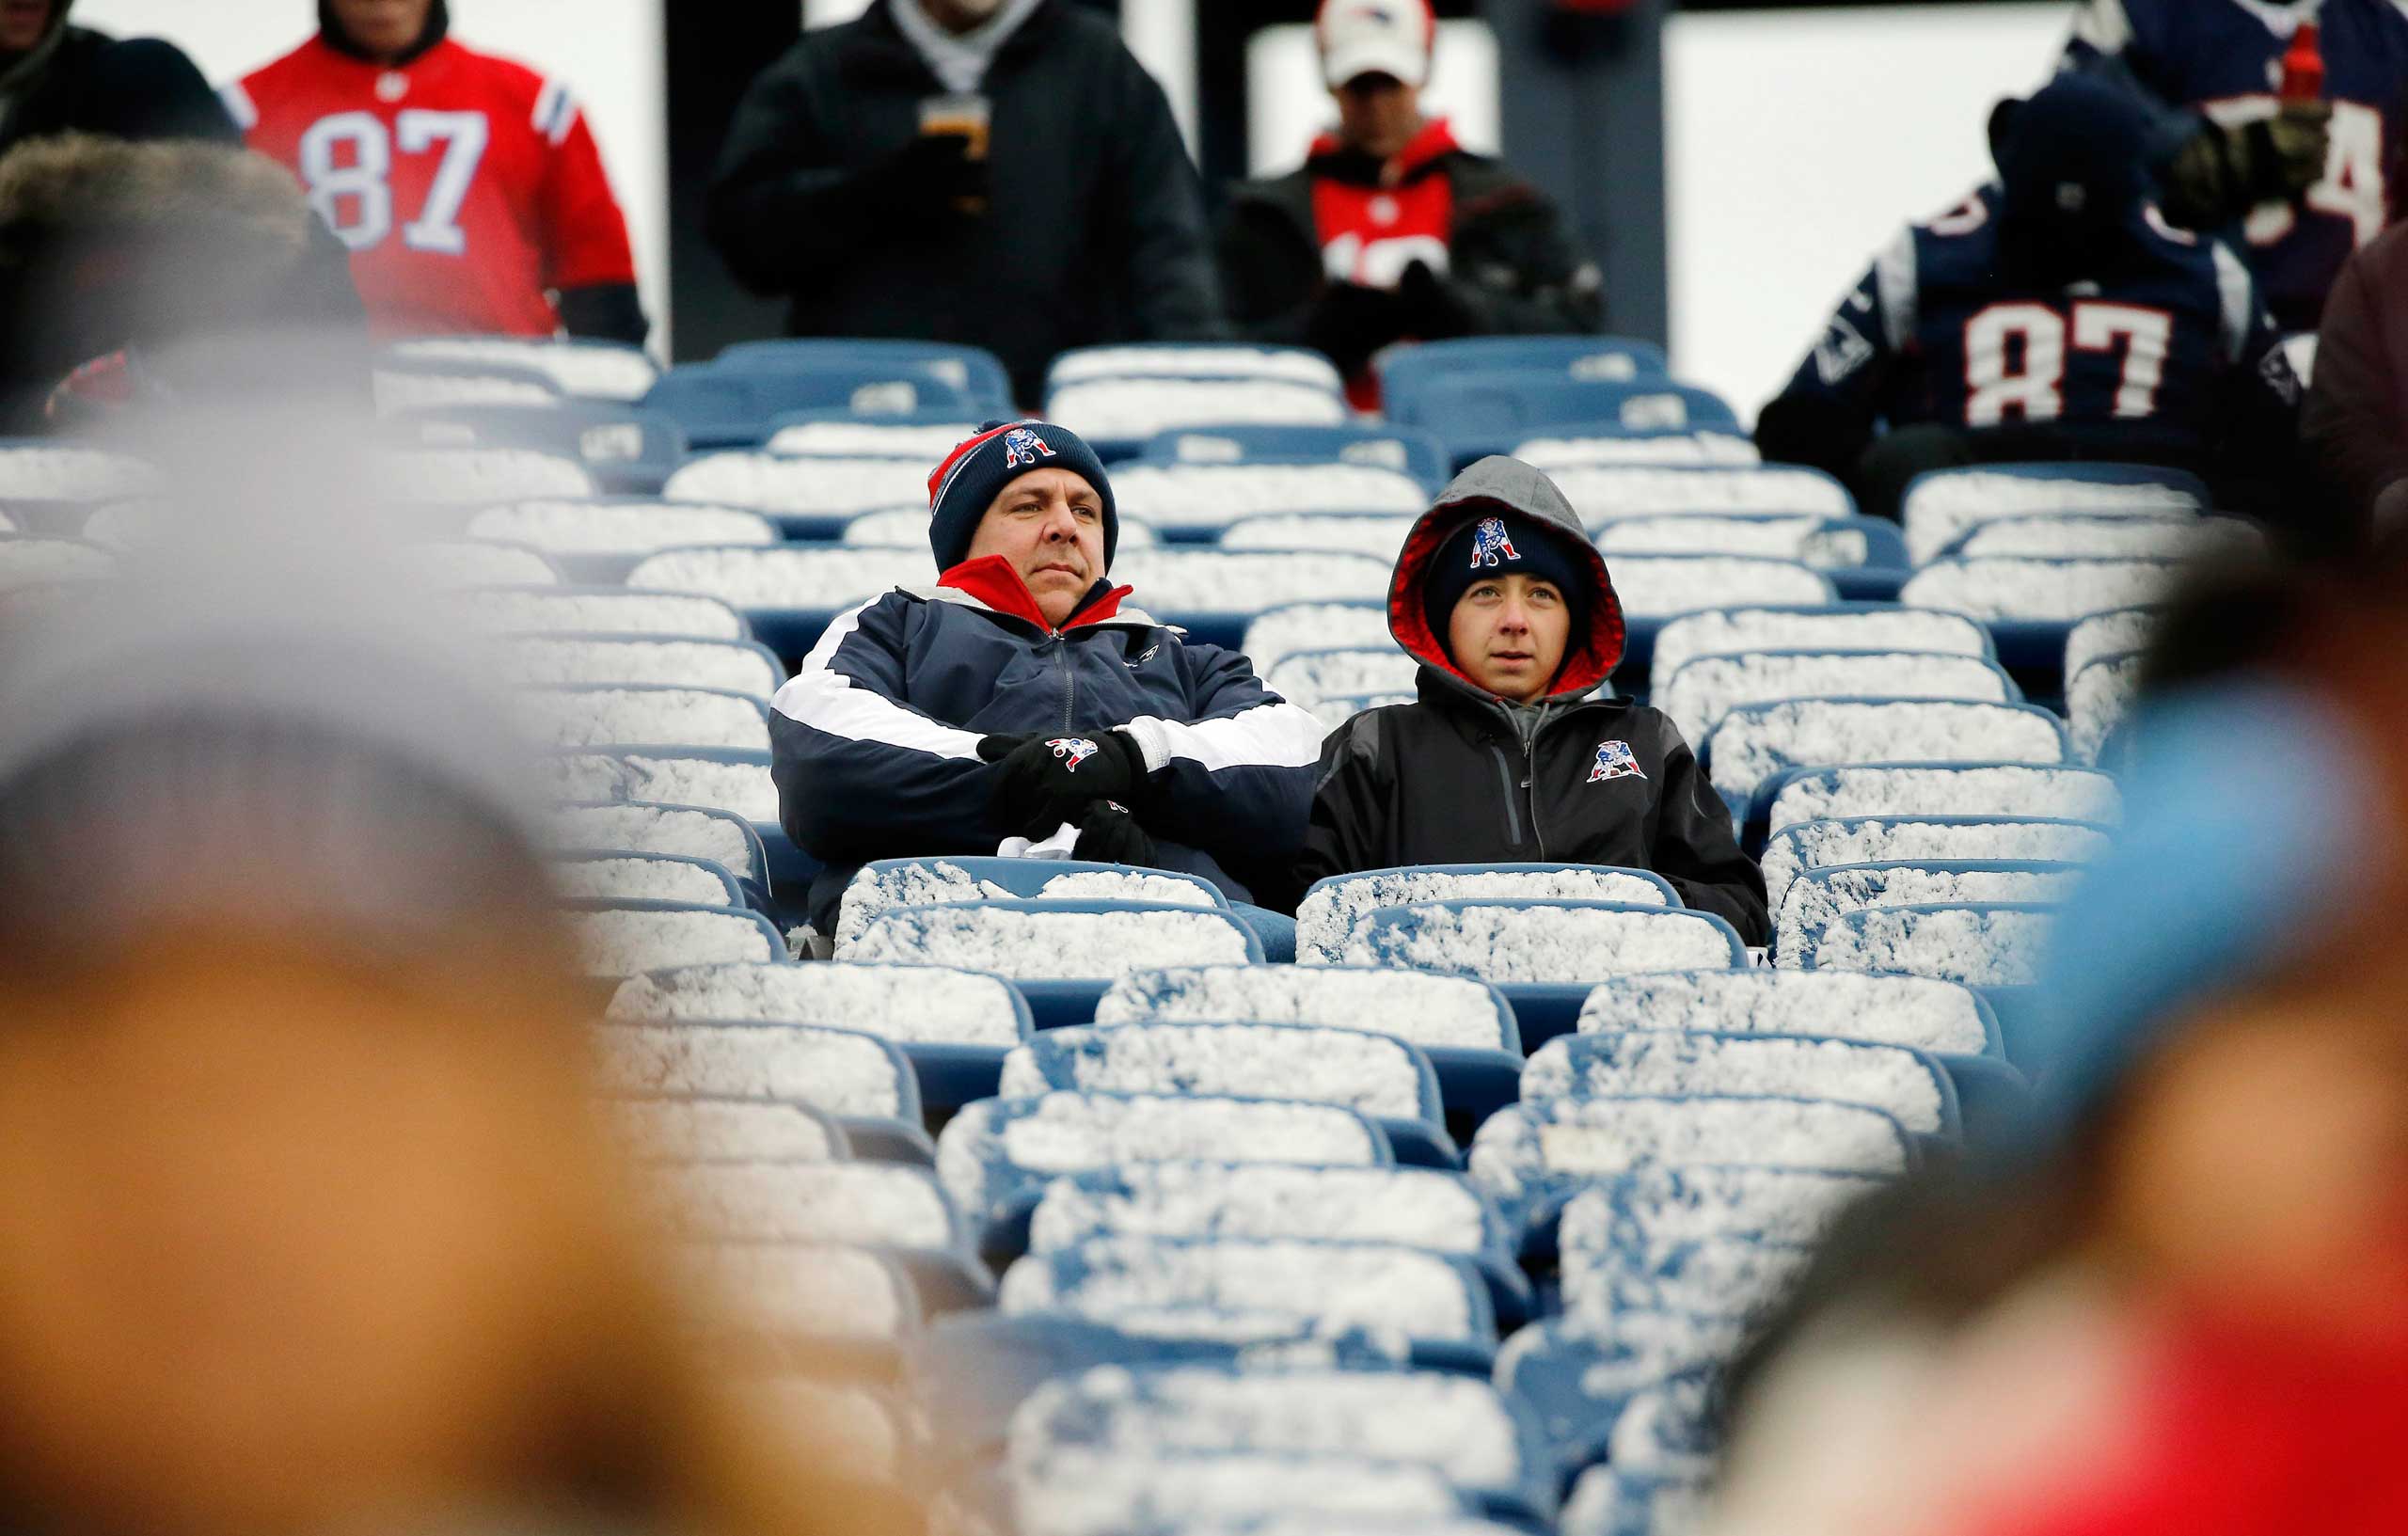 New England Patriots fans sit in seats coated by a light morning snow before an NFL football game between the Patriots and the Denver Broncos on Nov. 2, 2014, at Gillette Stadium in Foxborough, Mass. (Elise Amendola—AP)